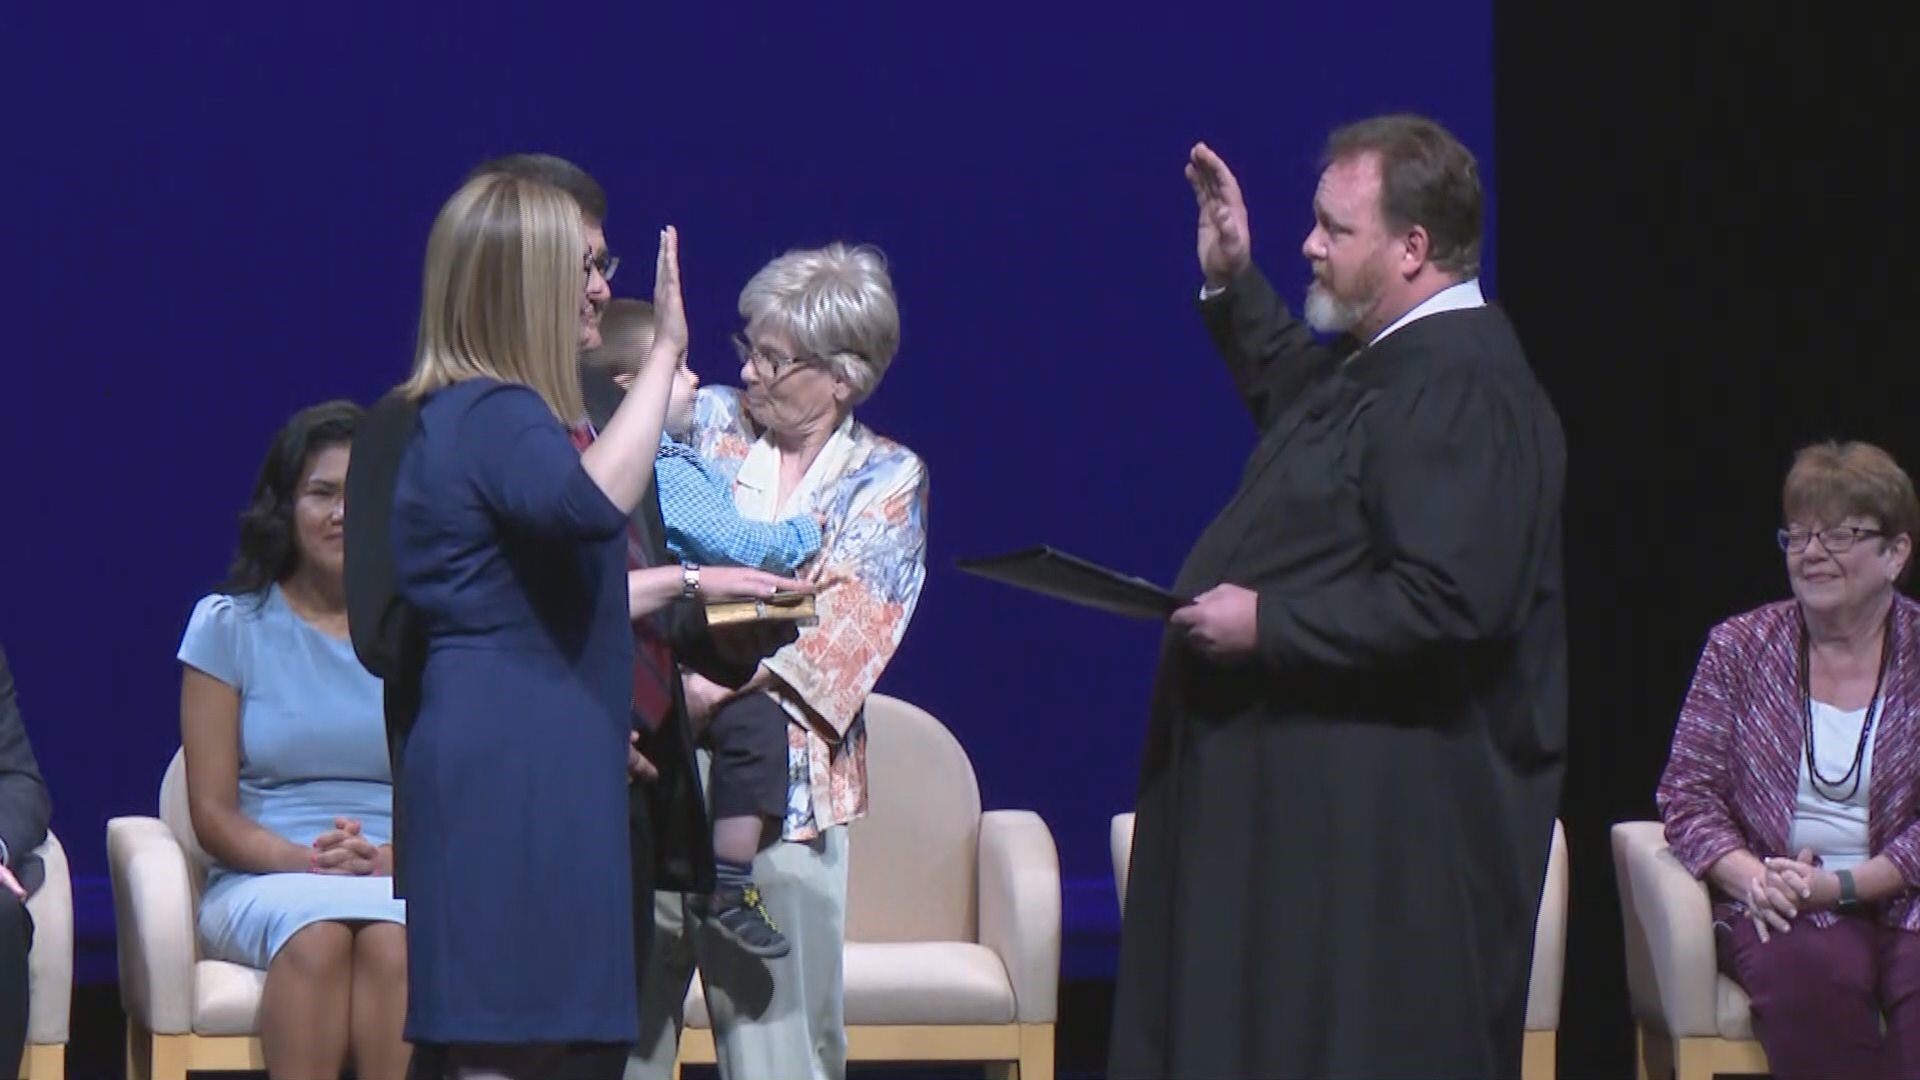 Kate Gallego has been sworn in as the next mayor of Phoenix. Gallego beat Daniel Valenzuela for the seat in a runoff election on March 12, 2019.